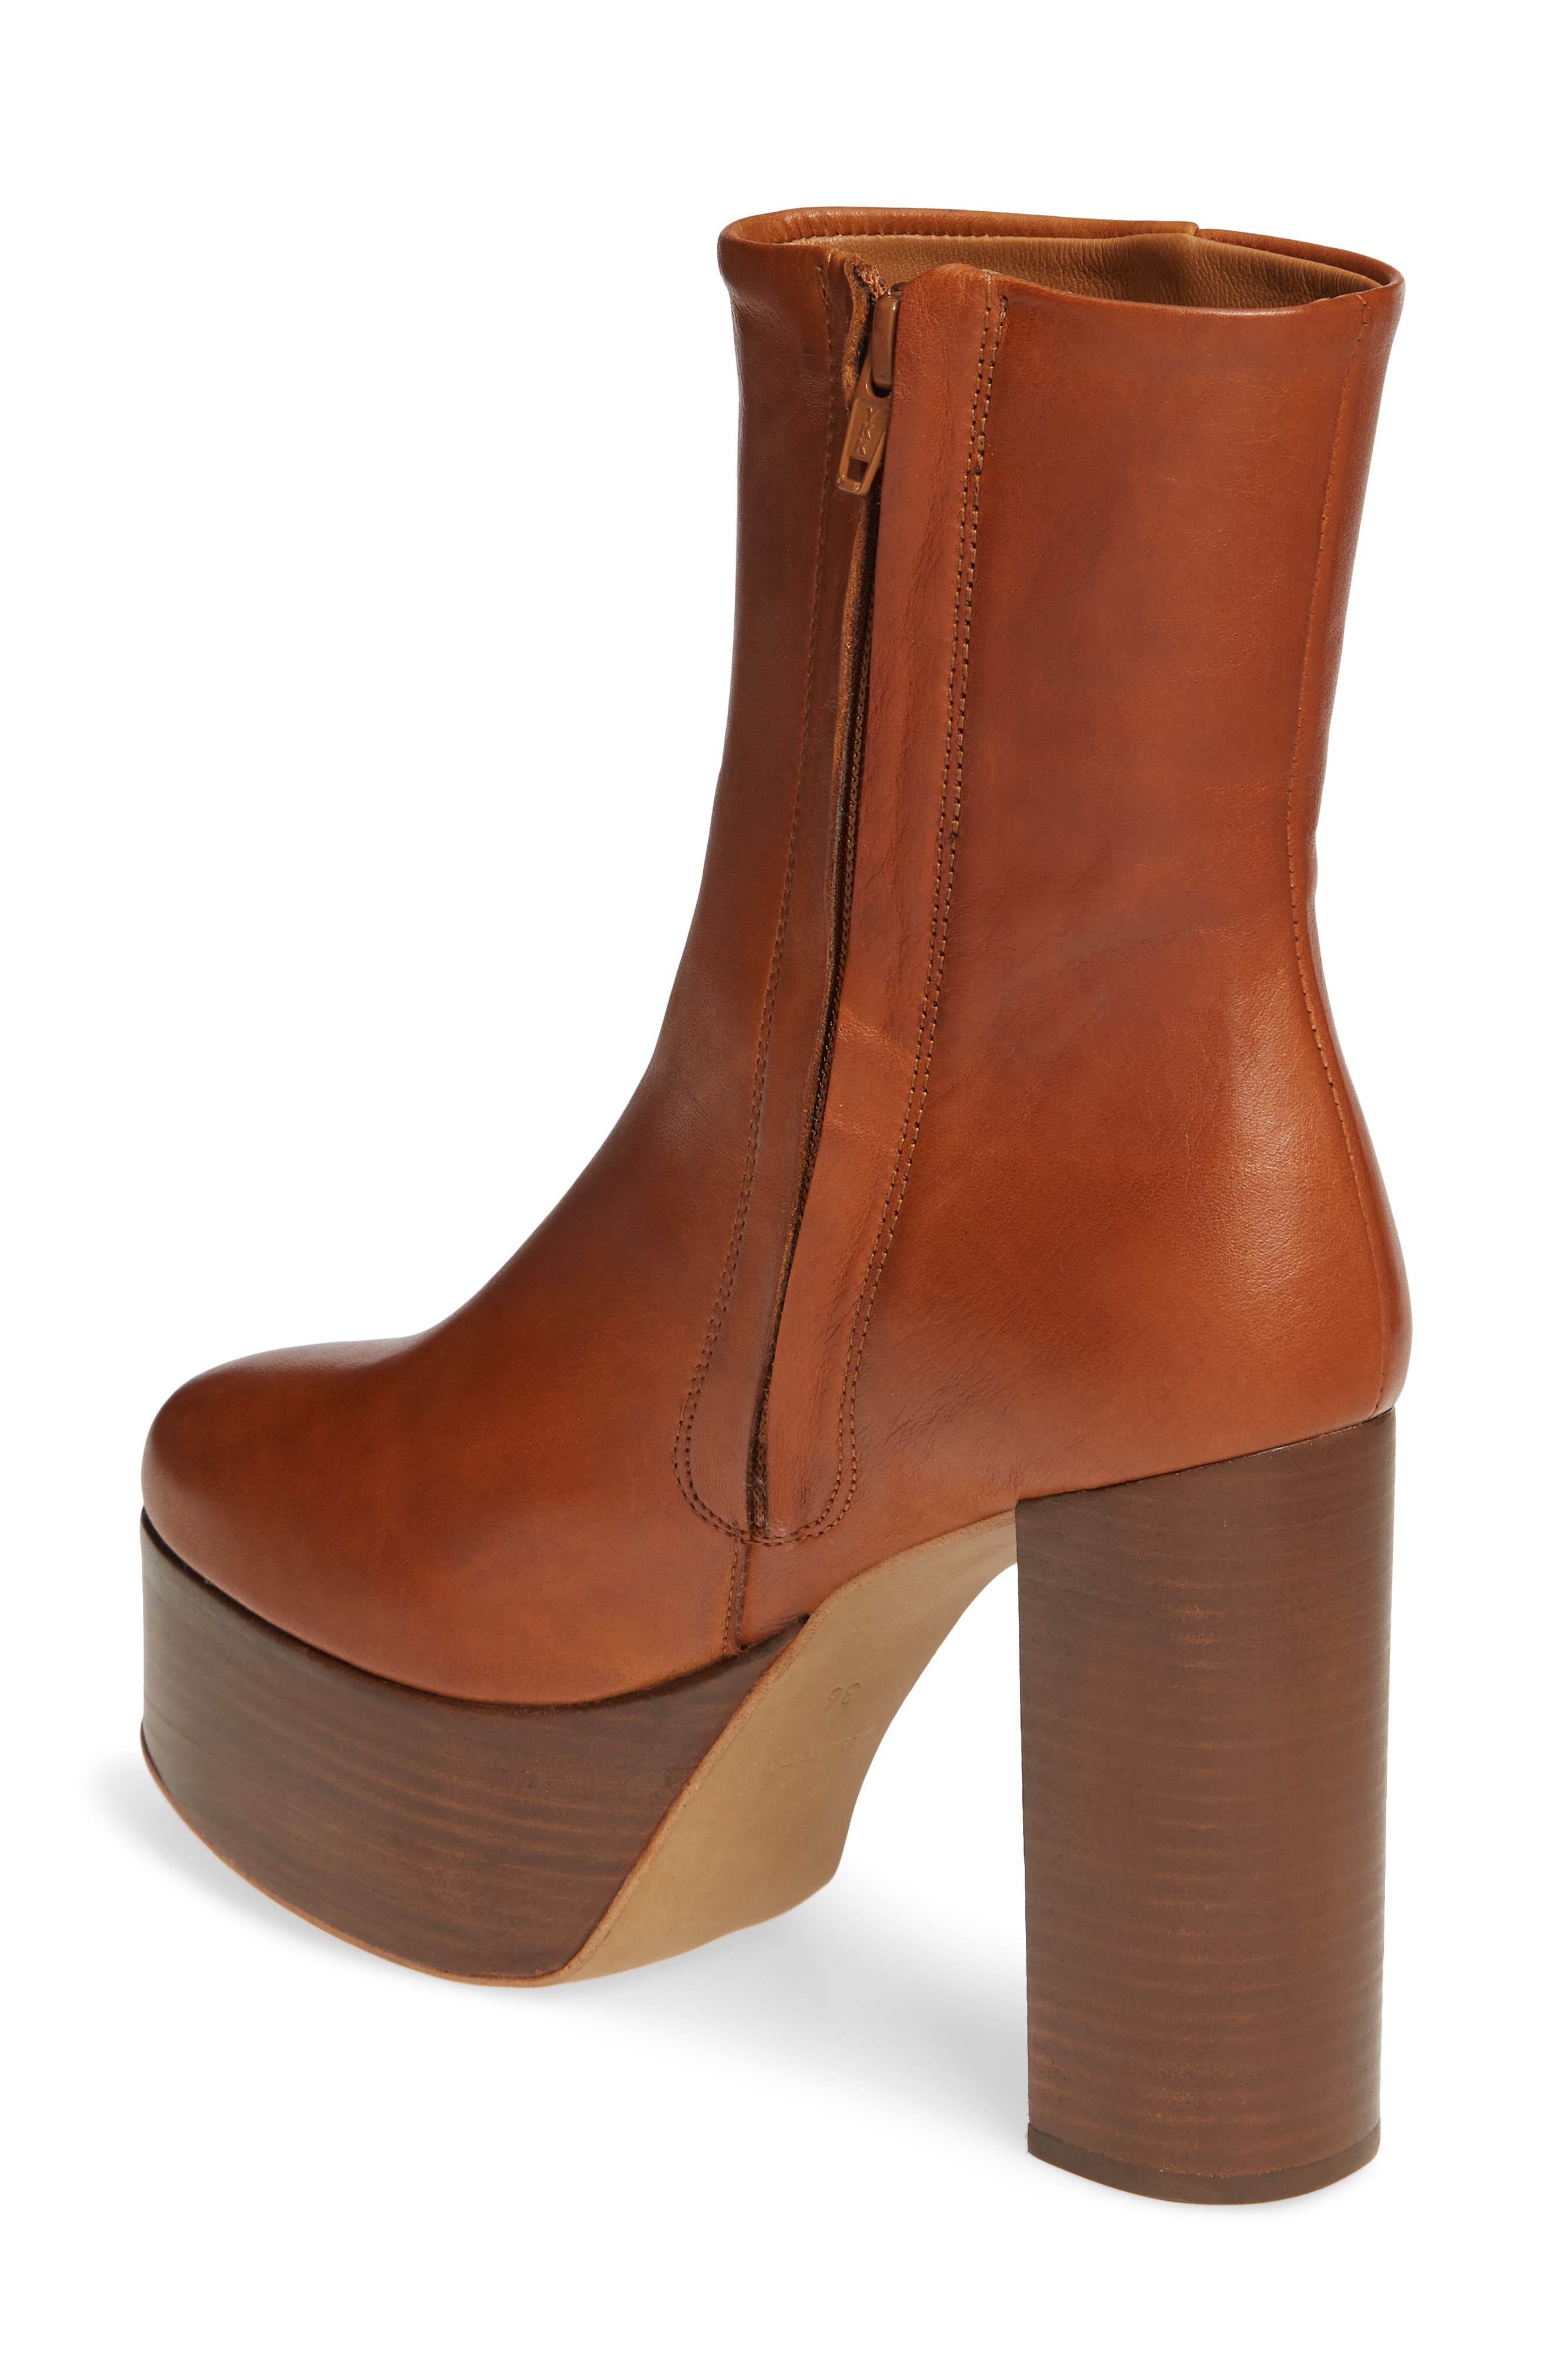 Free People | Friday Night Platform Leather Boot | Nordstrom Rack